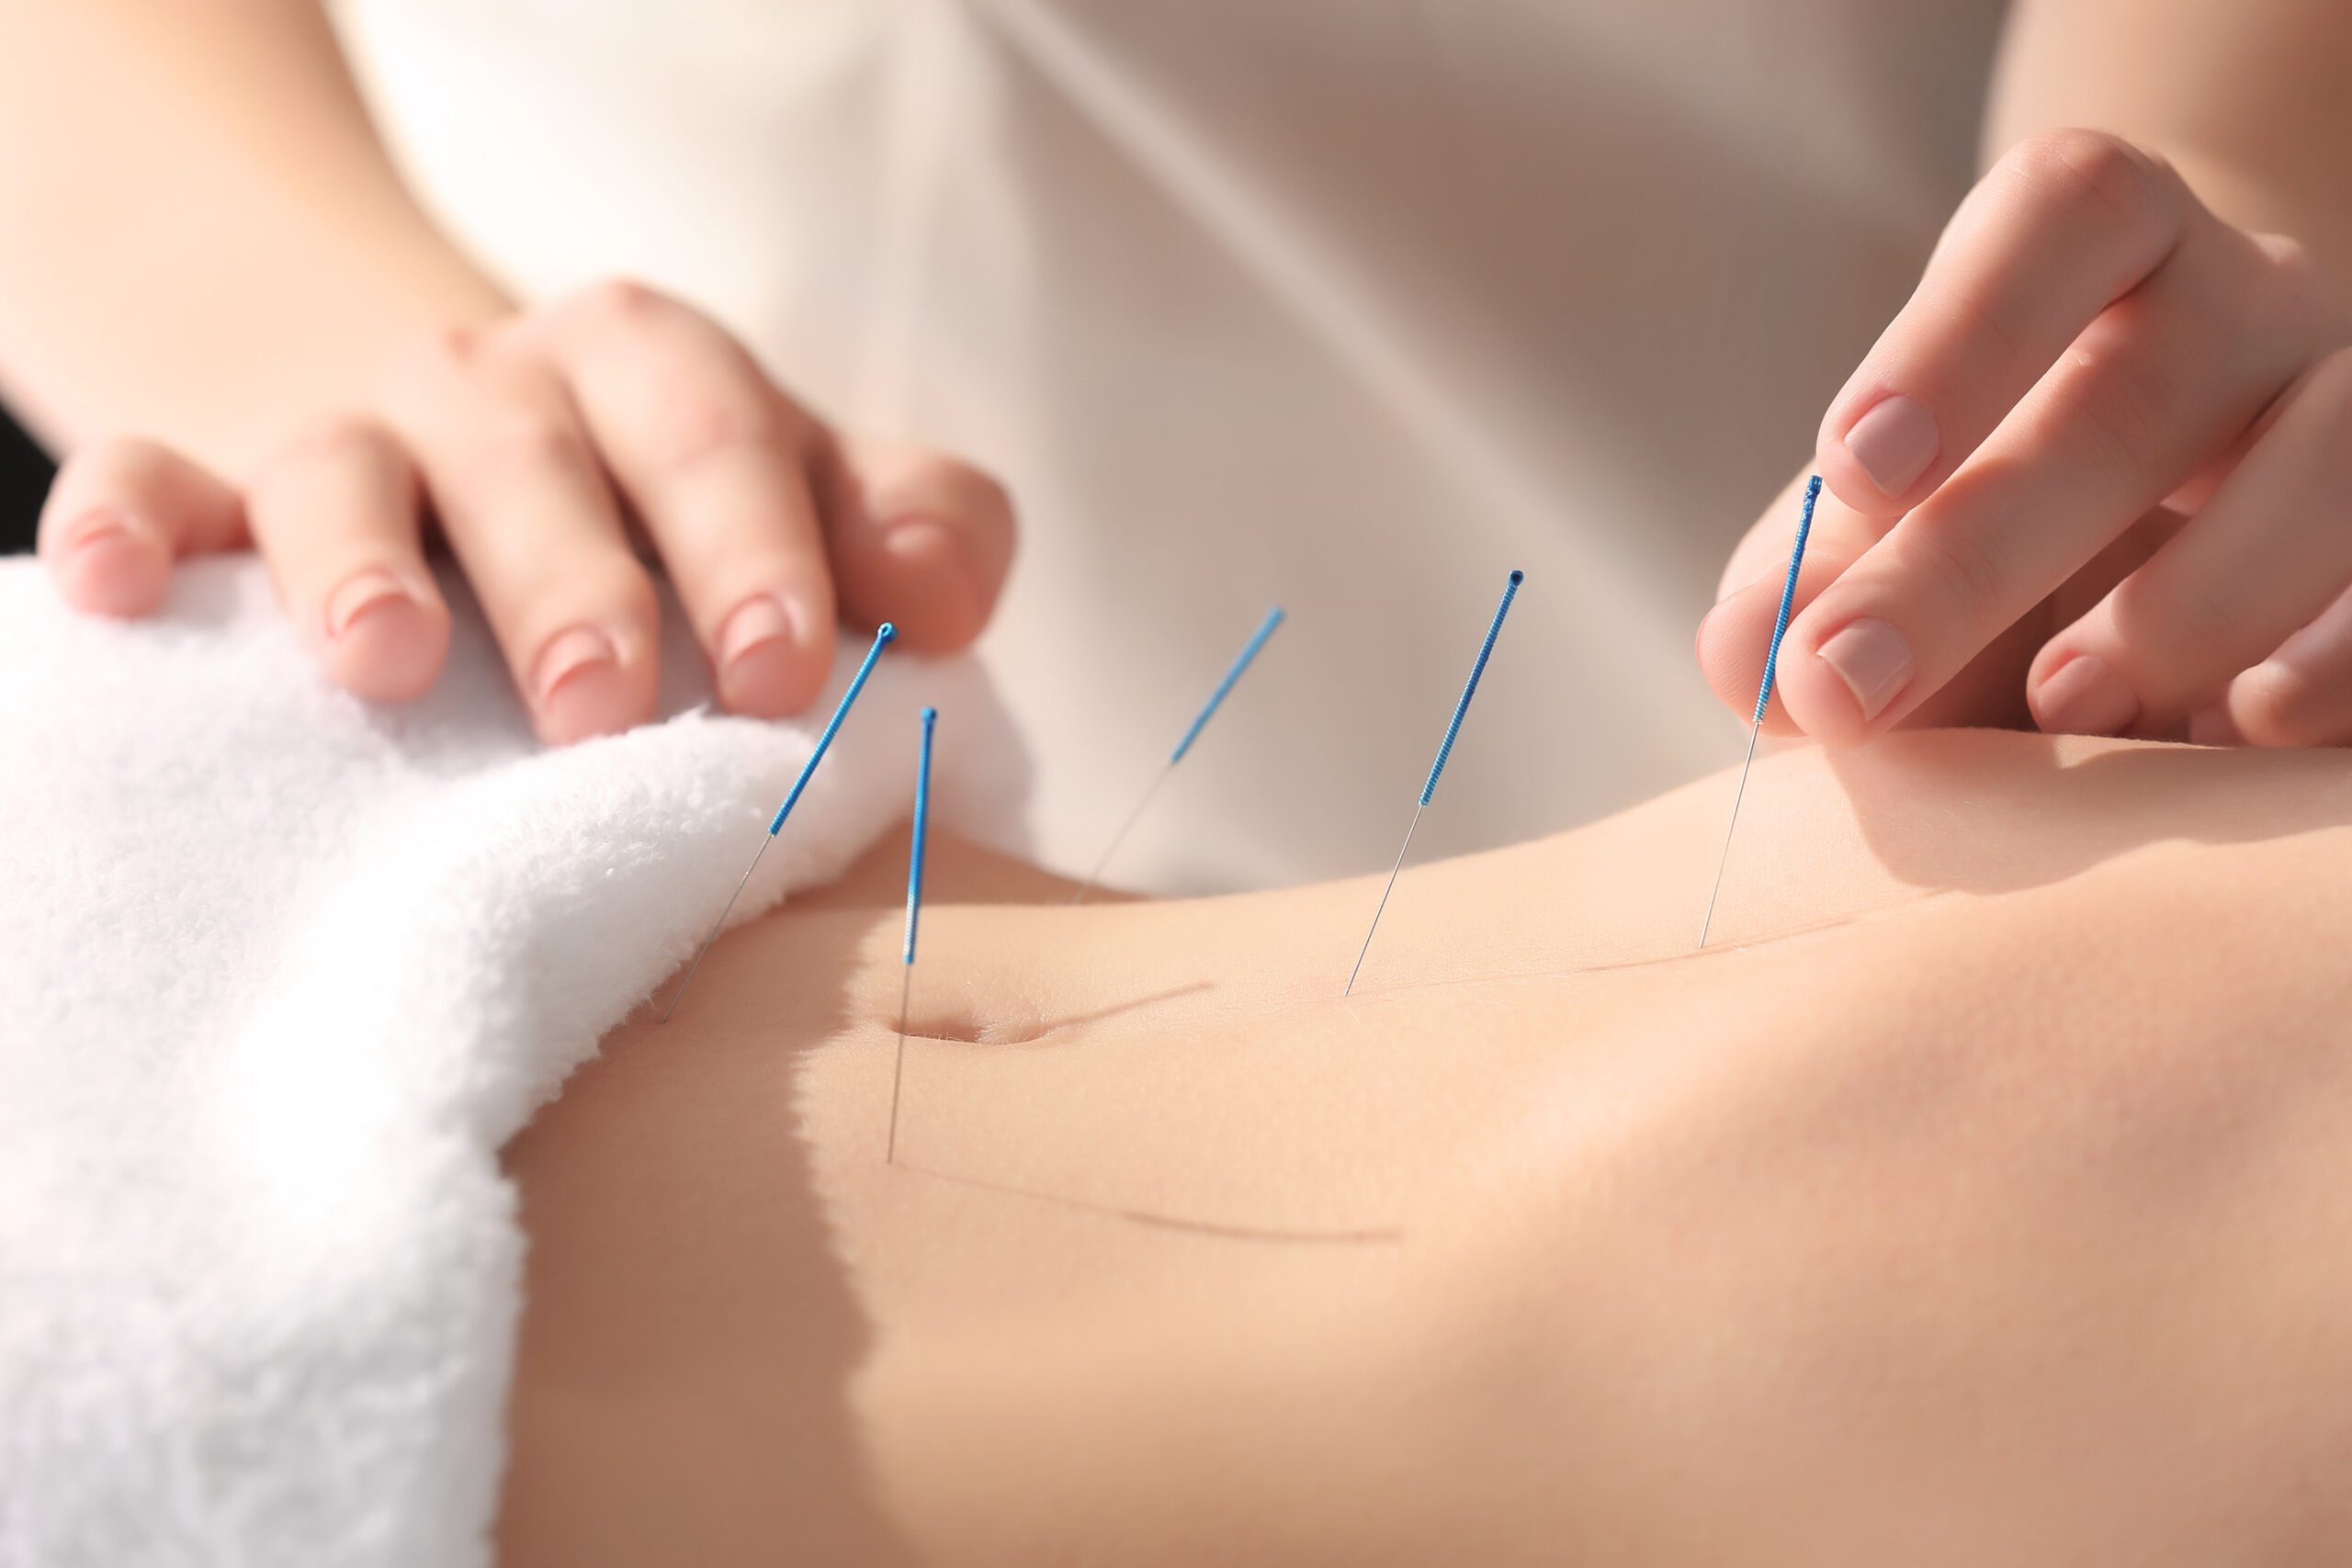 Piercing Pain And Restoring Harmony: The Technique Used In Acupuncture